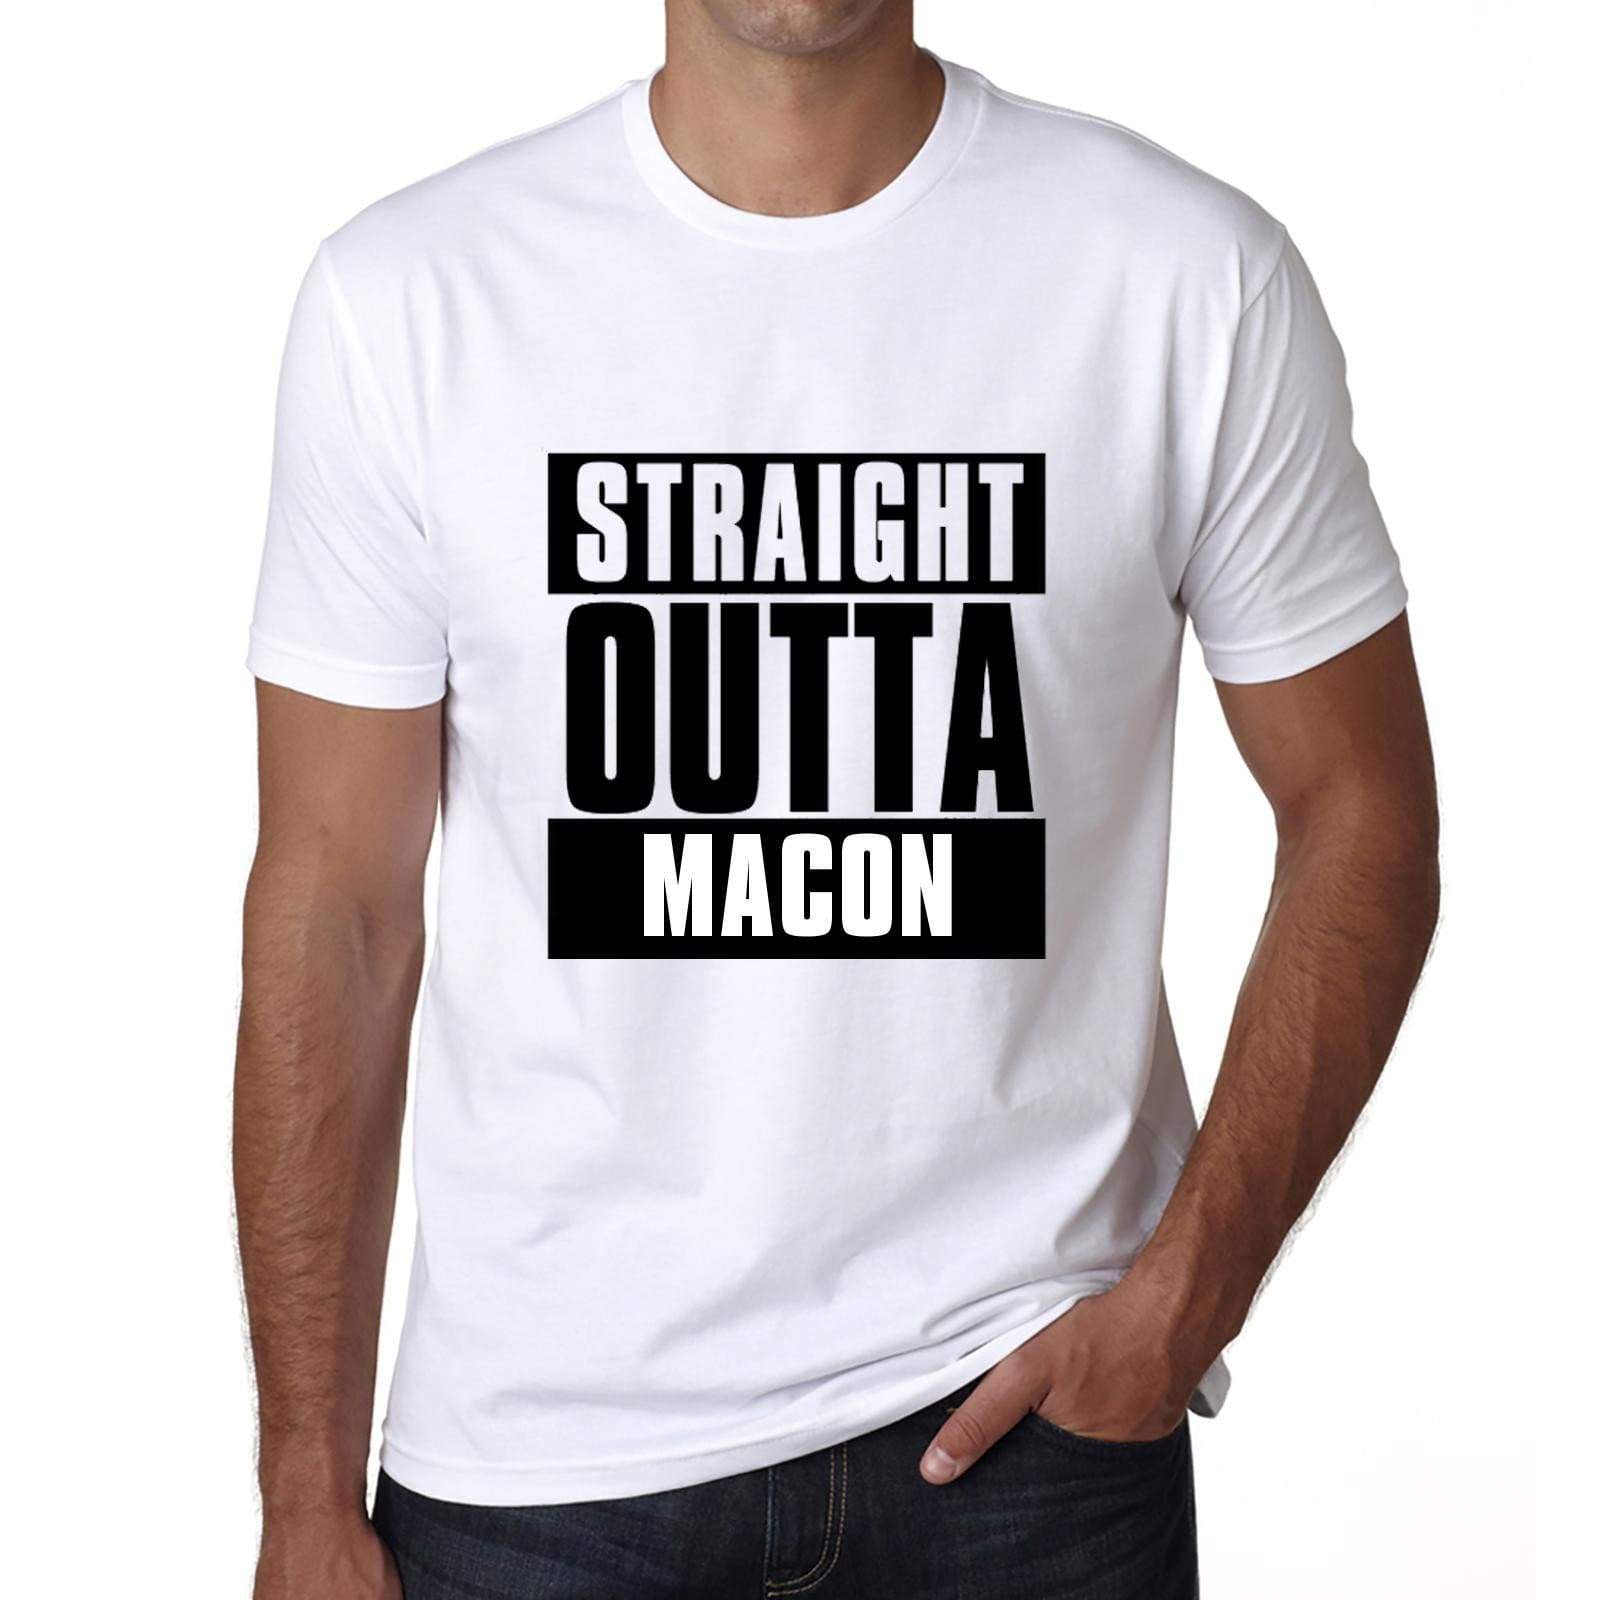 Straight Outta Macon Mens Short Sleeve Round Neck T-Shirt 00027 - White / S - Casual